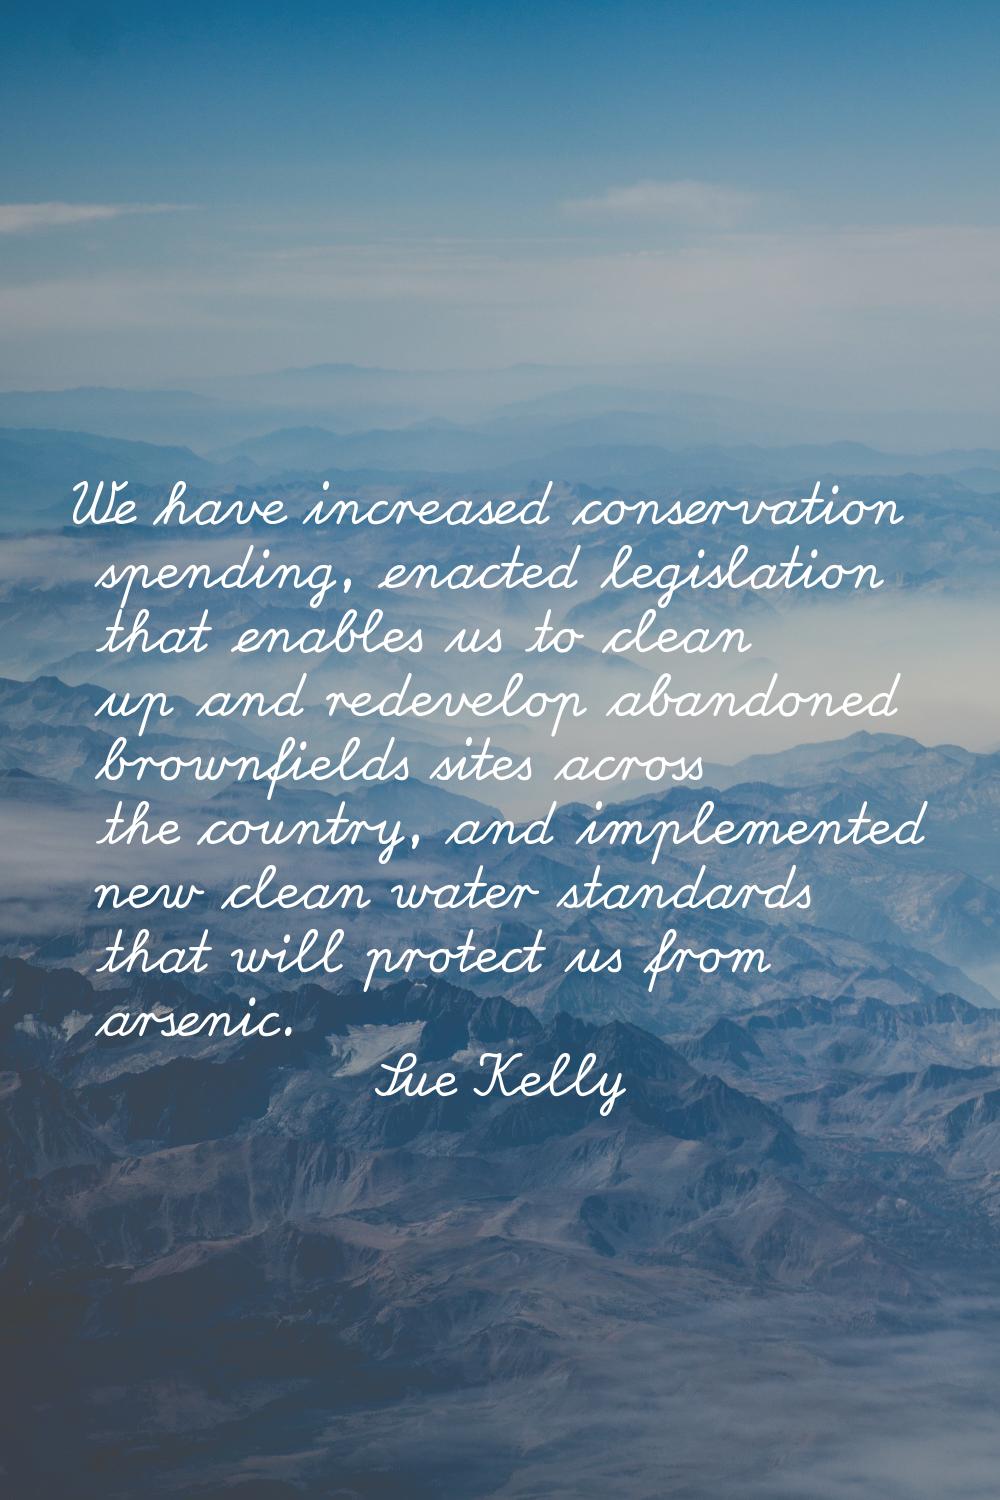 We have increased conservation spending, enacted legislation that enables us to clean up and redeve